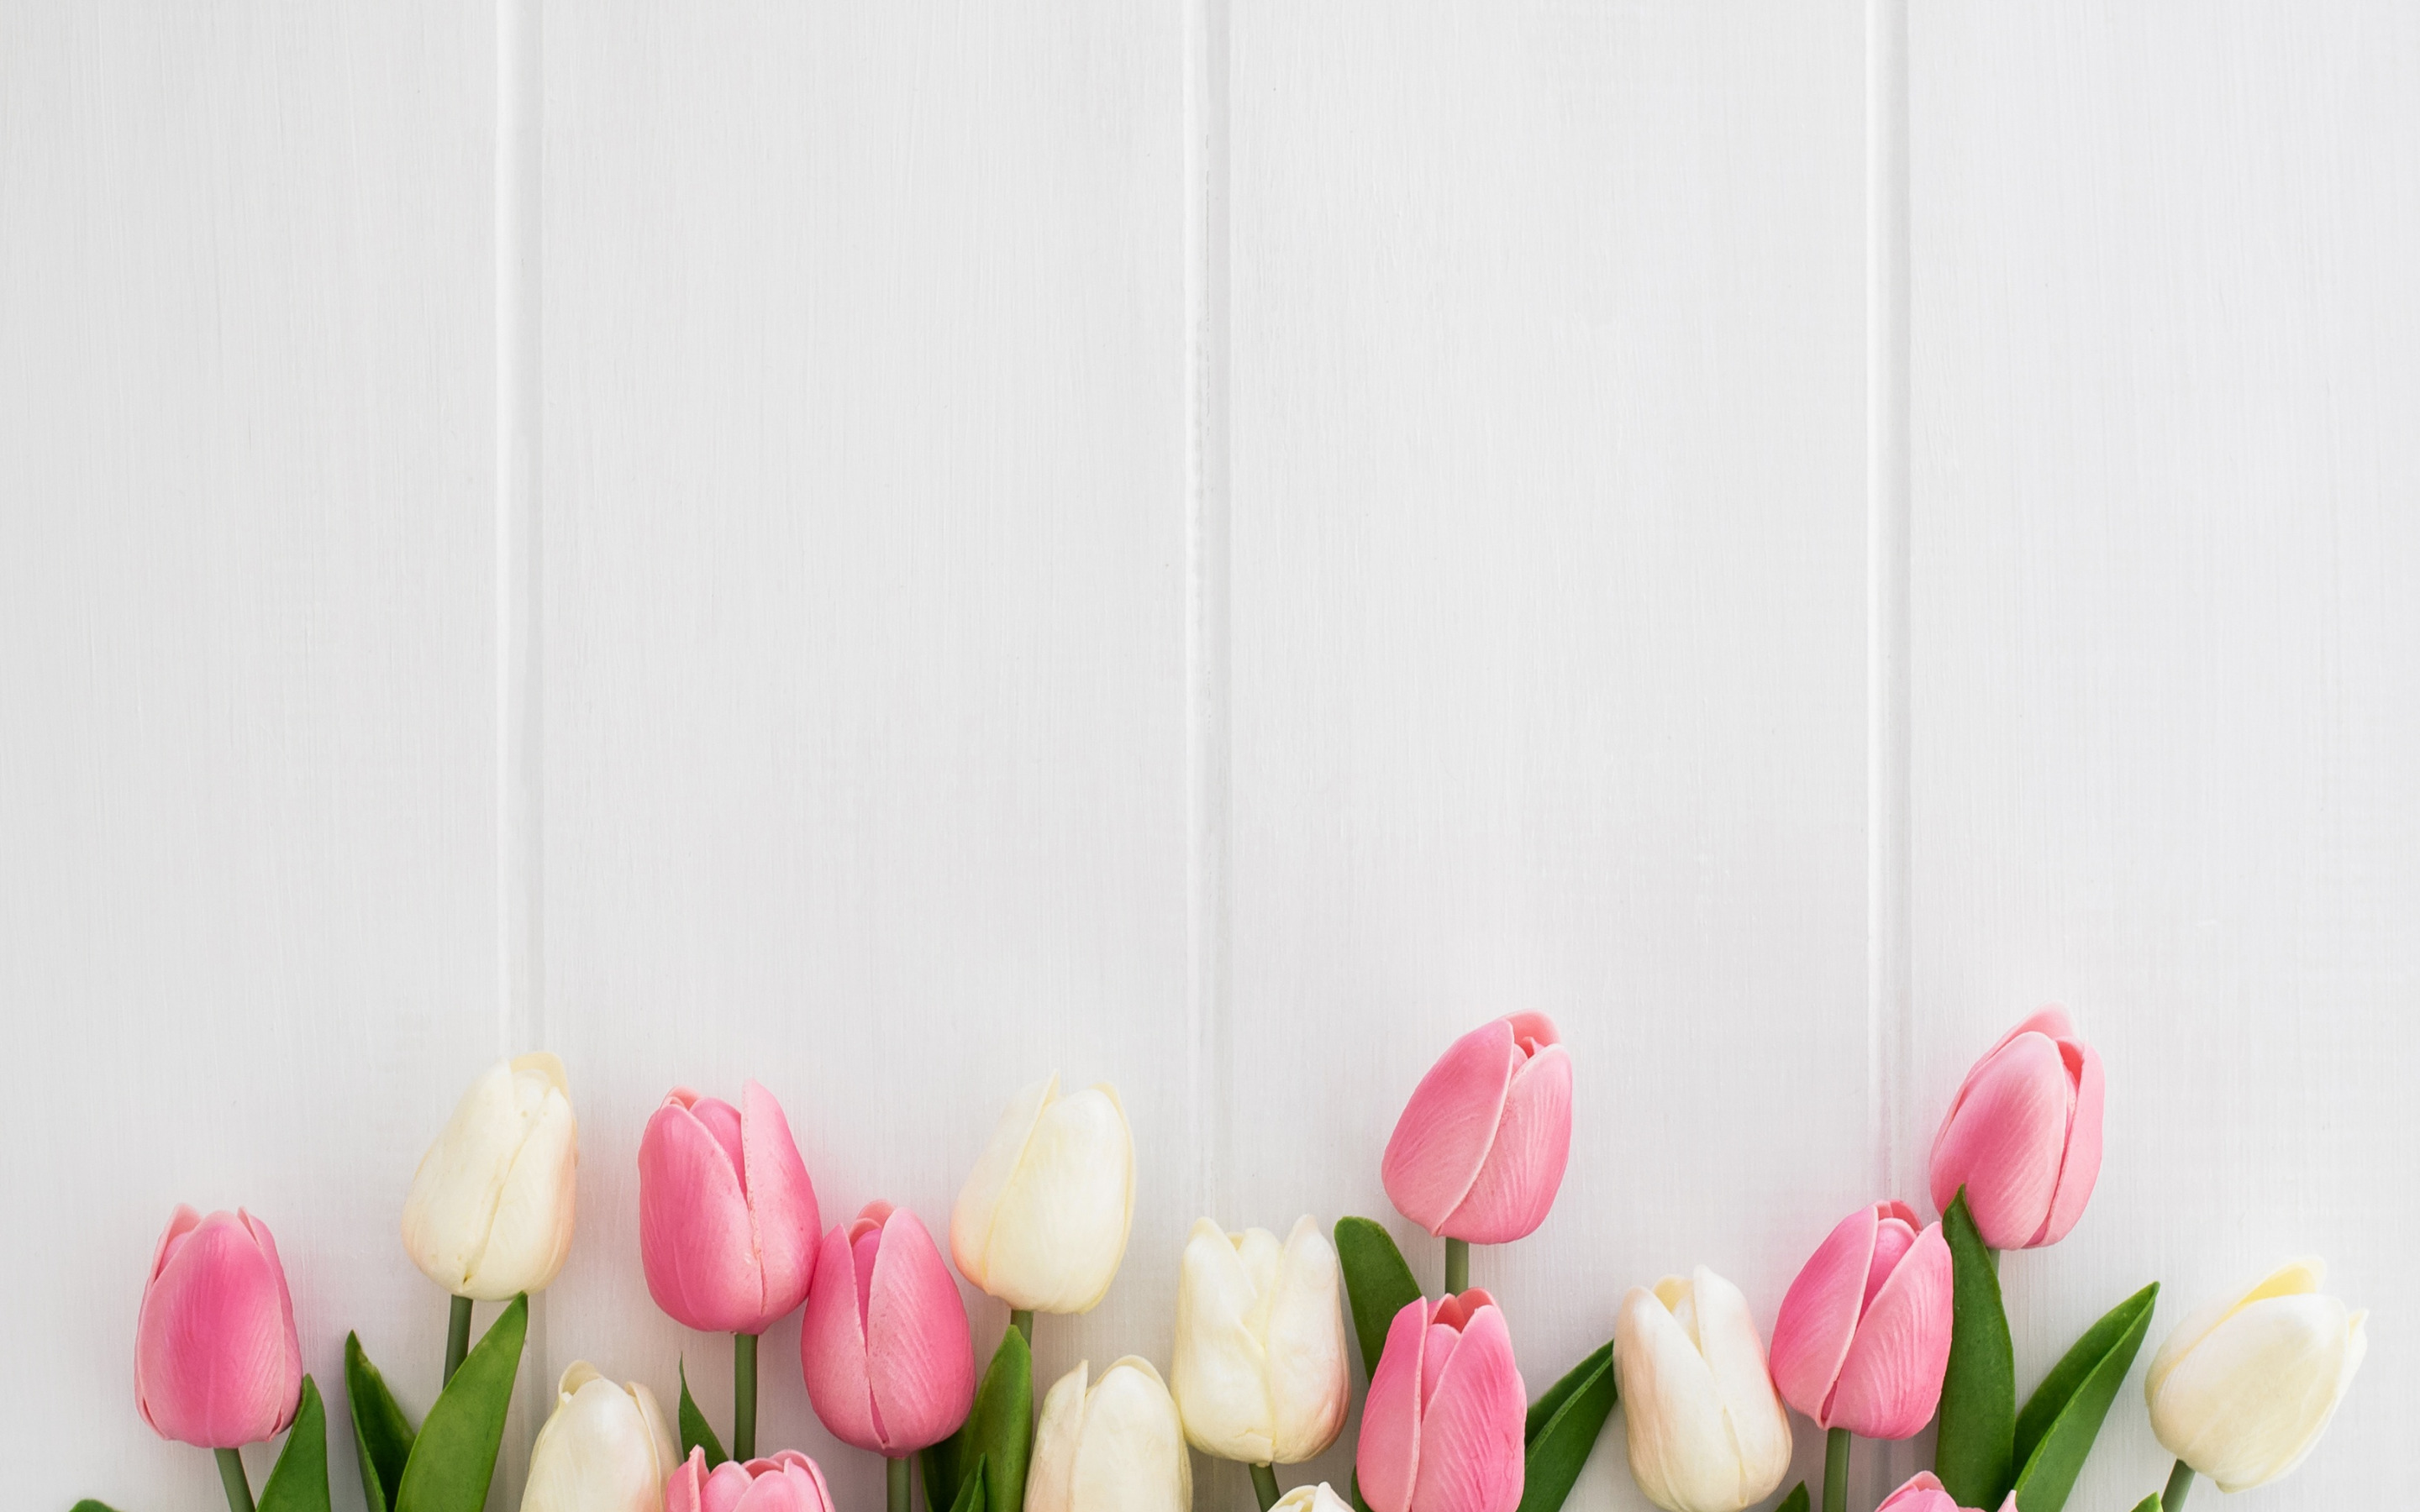 Download Wallpapers Tulips On A White Background Wooden White Images, Photos, Reviews